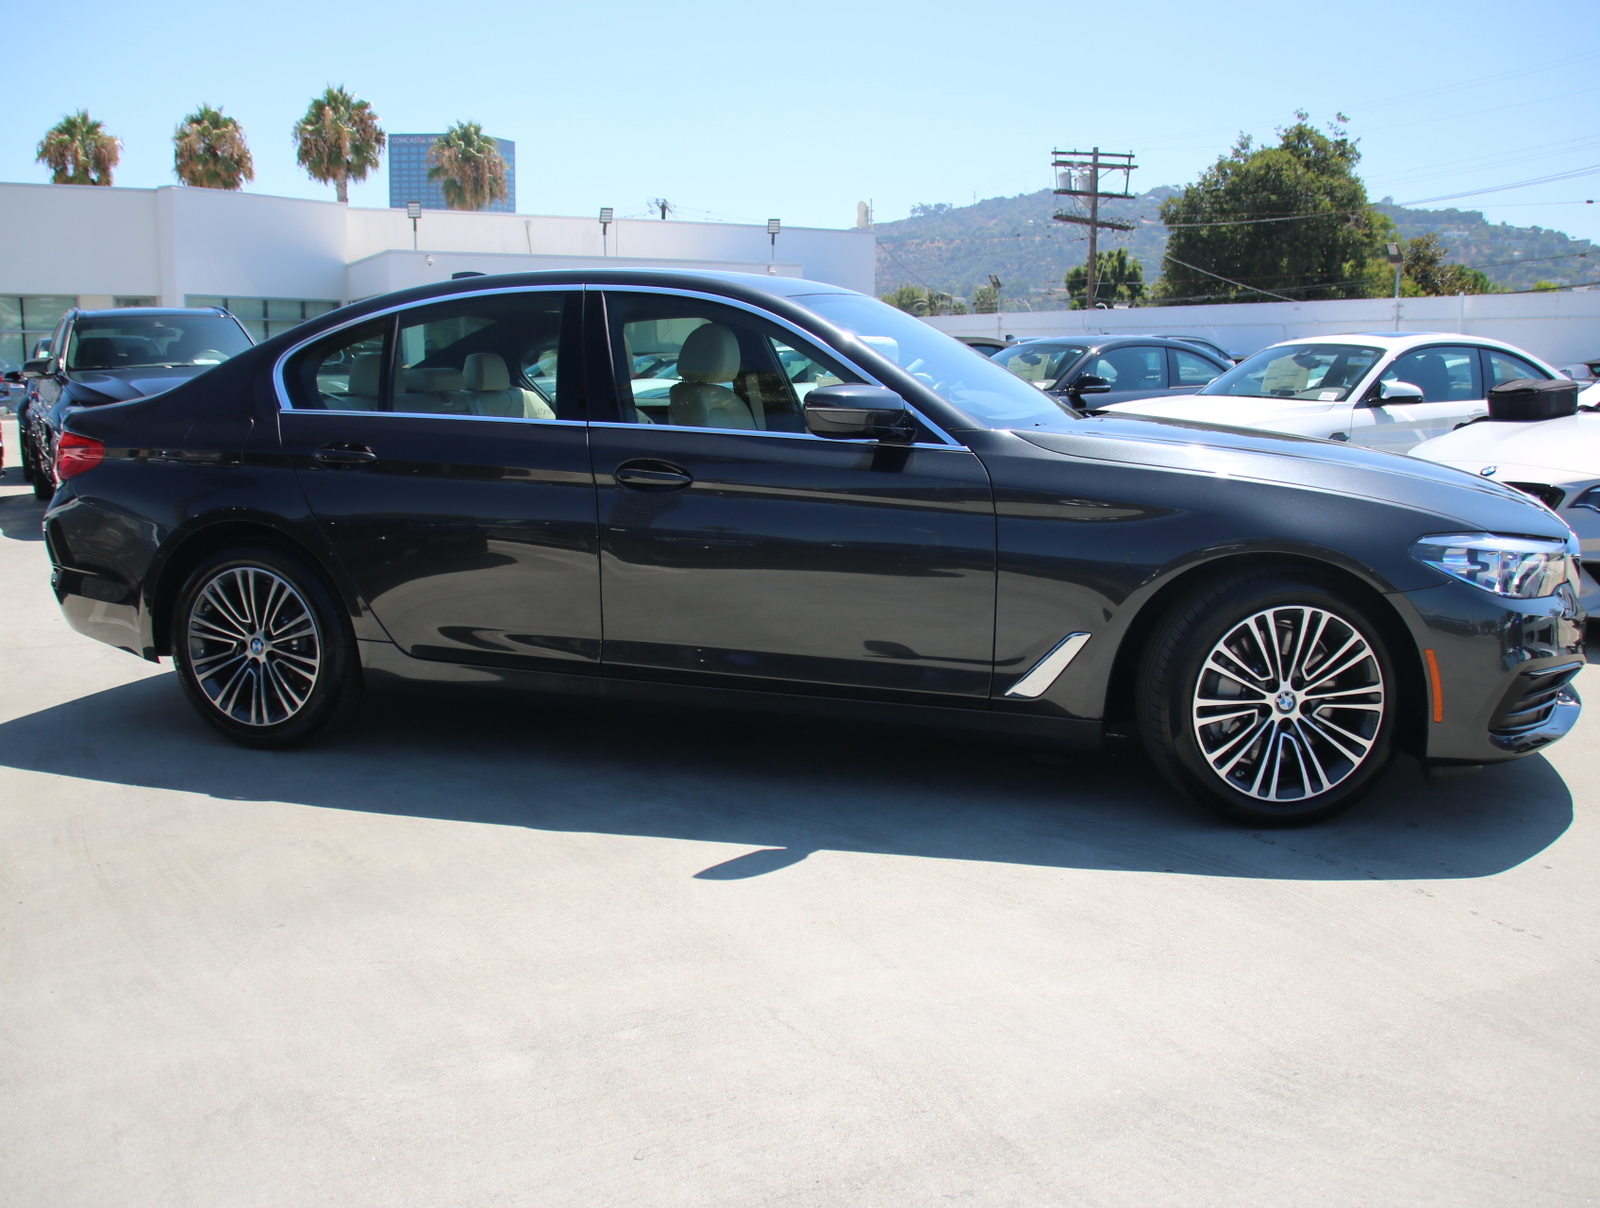 Pre-Owned 2019 BMW 5 Series 530i 530i Sedan in North Hollywood #P68500 ...